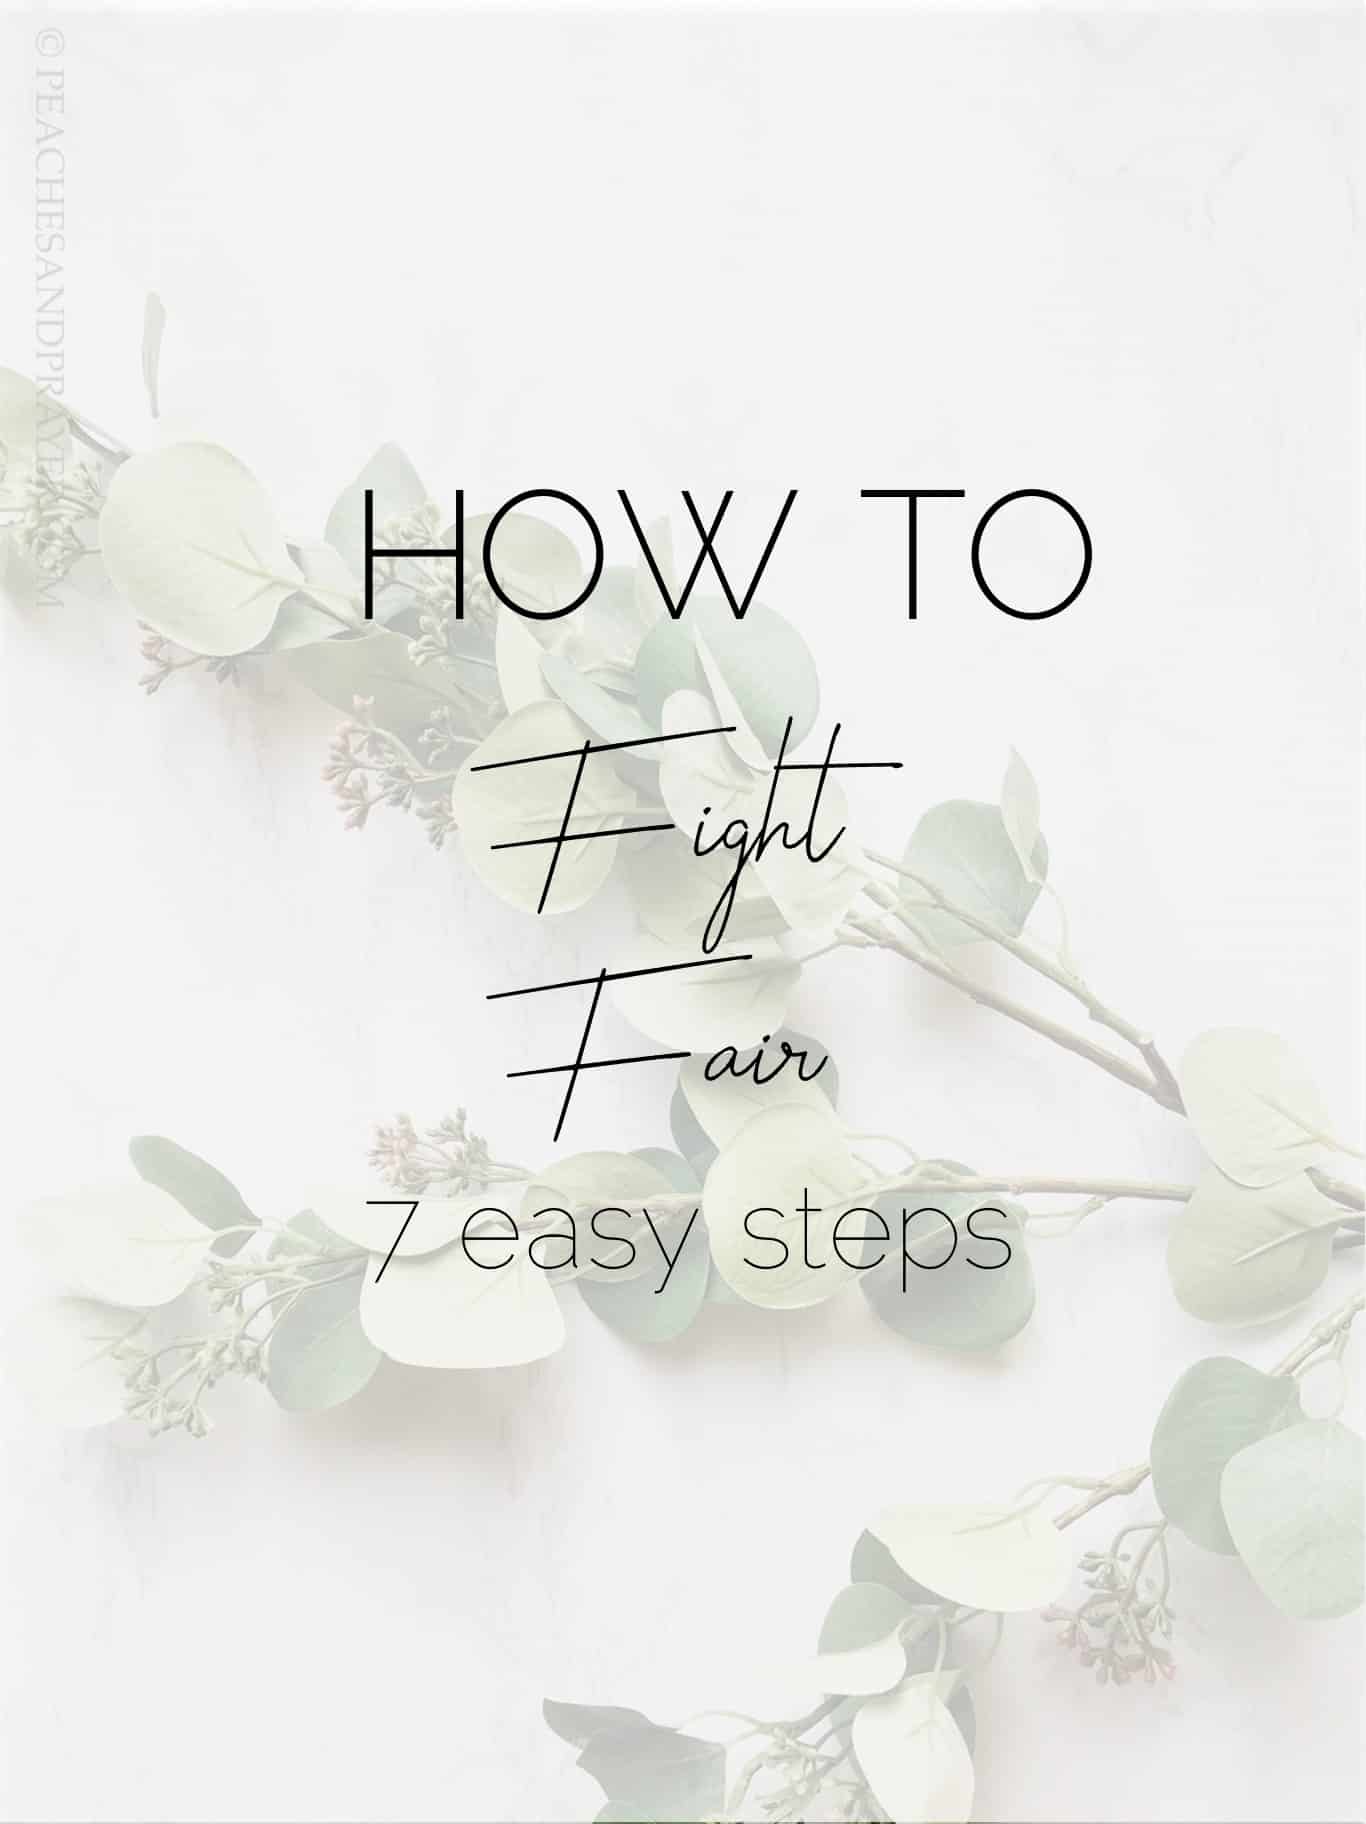 How To Fight Fair – 7 Steps to Healthy Conflict